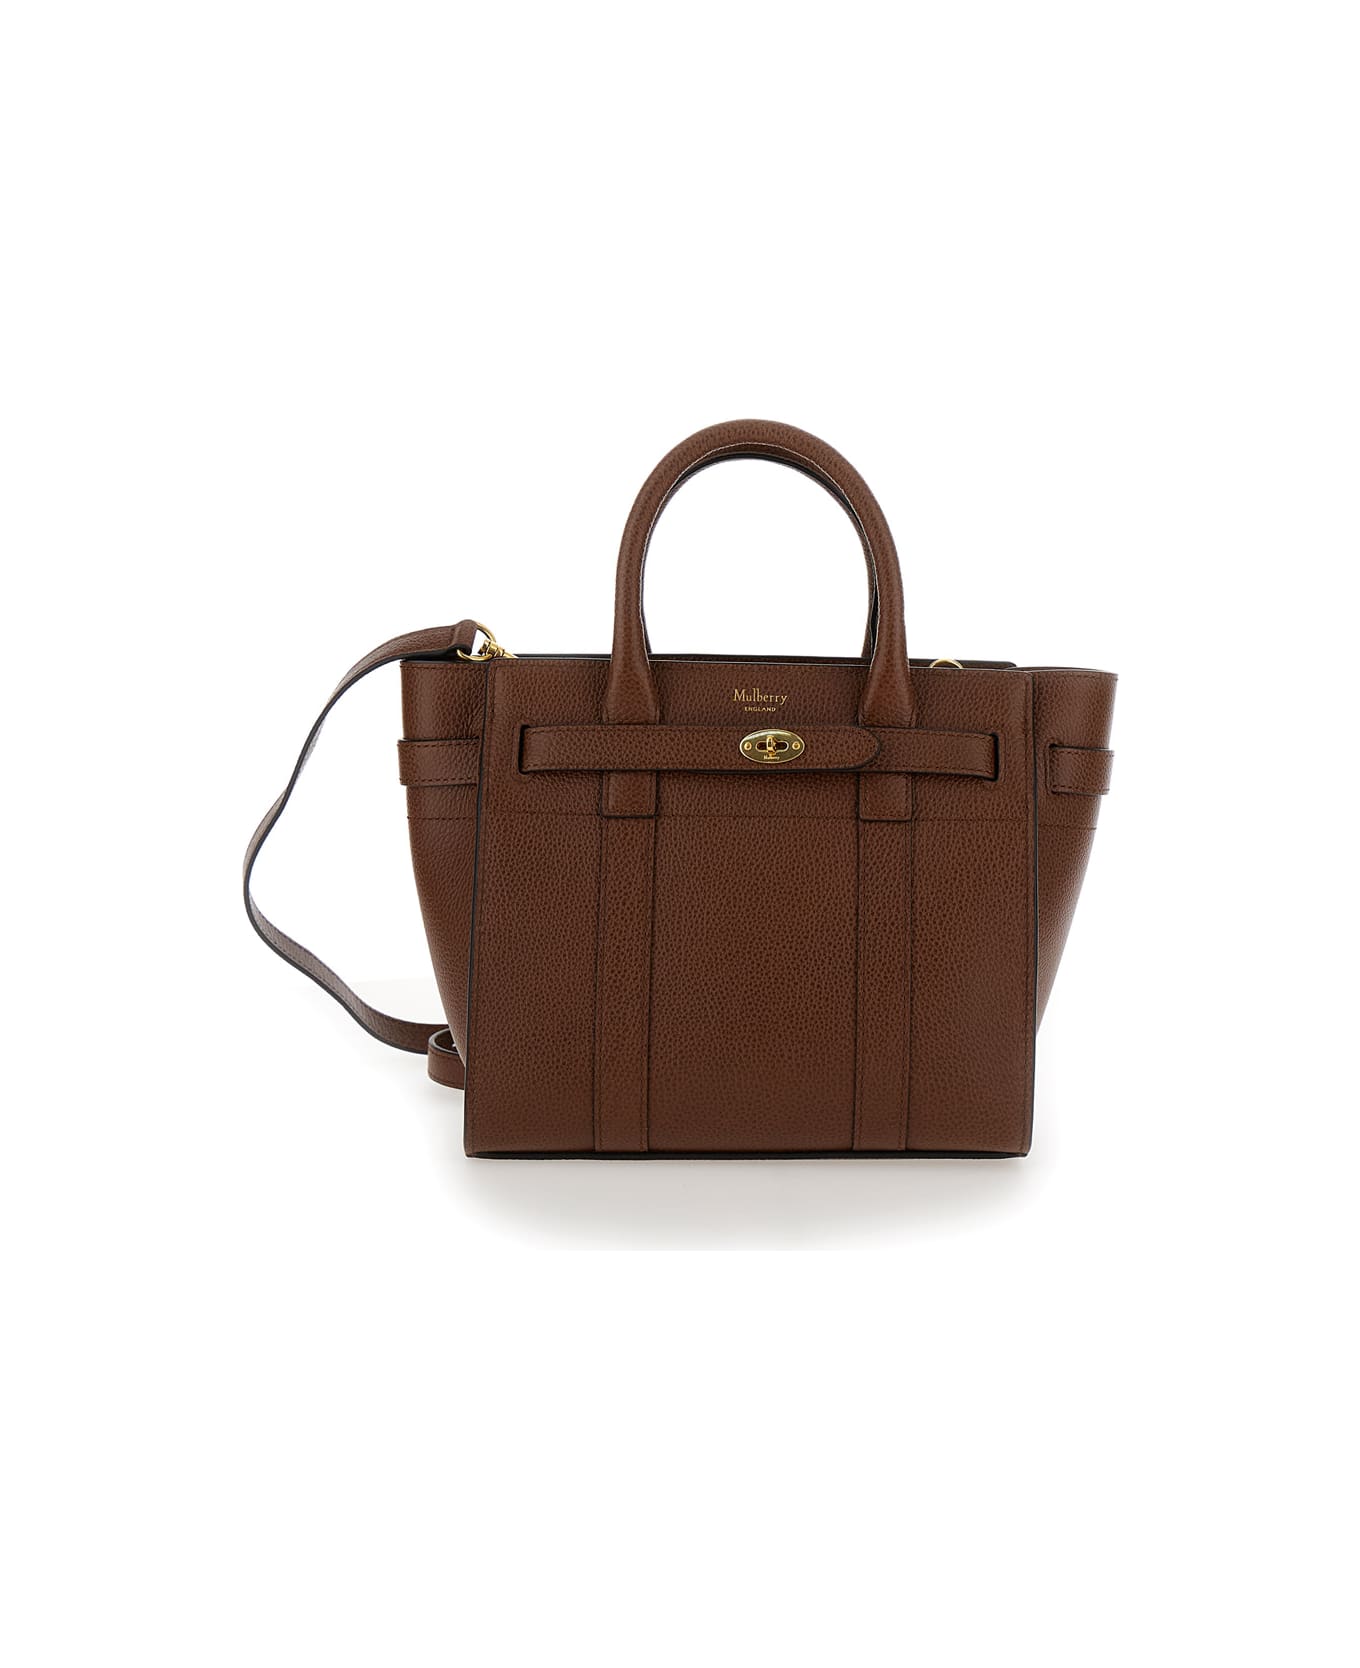 Mulberry 'mini Bayswater' Brown Crossbody Bag With Laminated Logo In Grained Leather Woman - Brown ショルダーバッグ